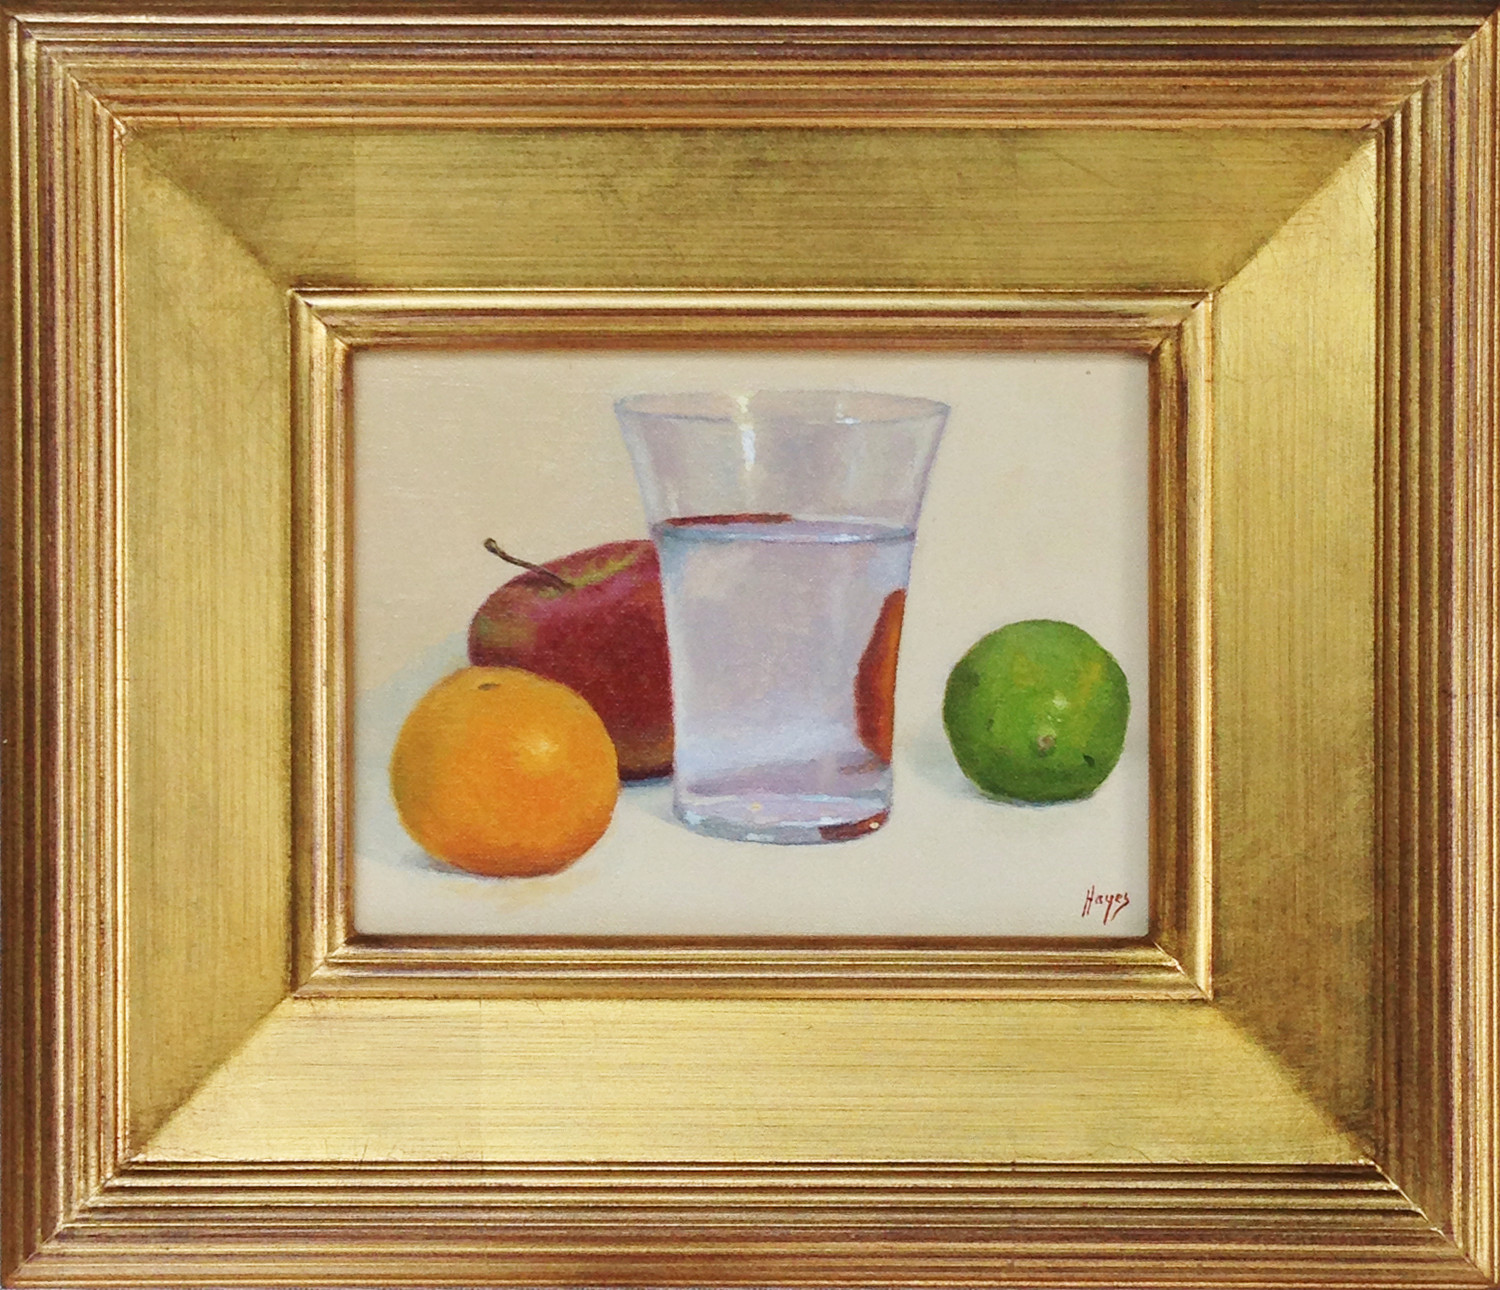 "Orange, Apple, Water Glass, Lime" in its frame